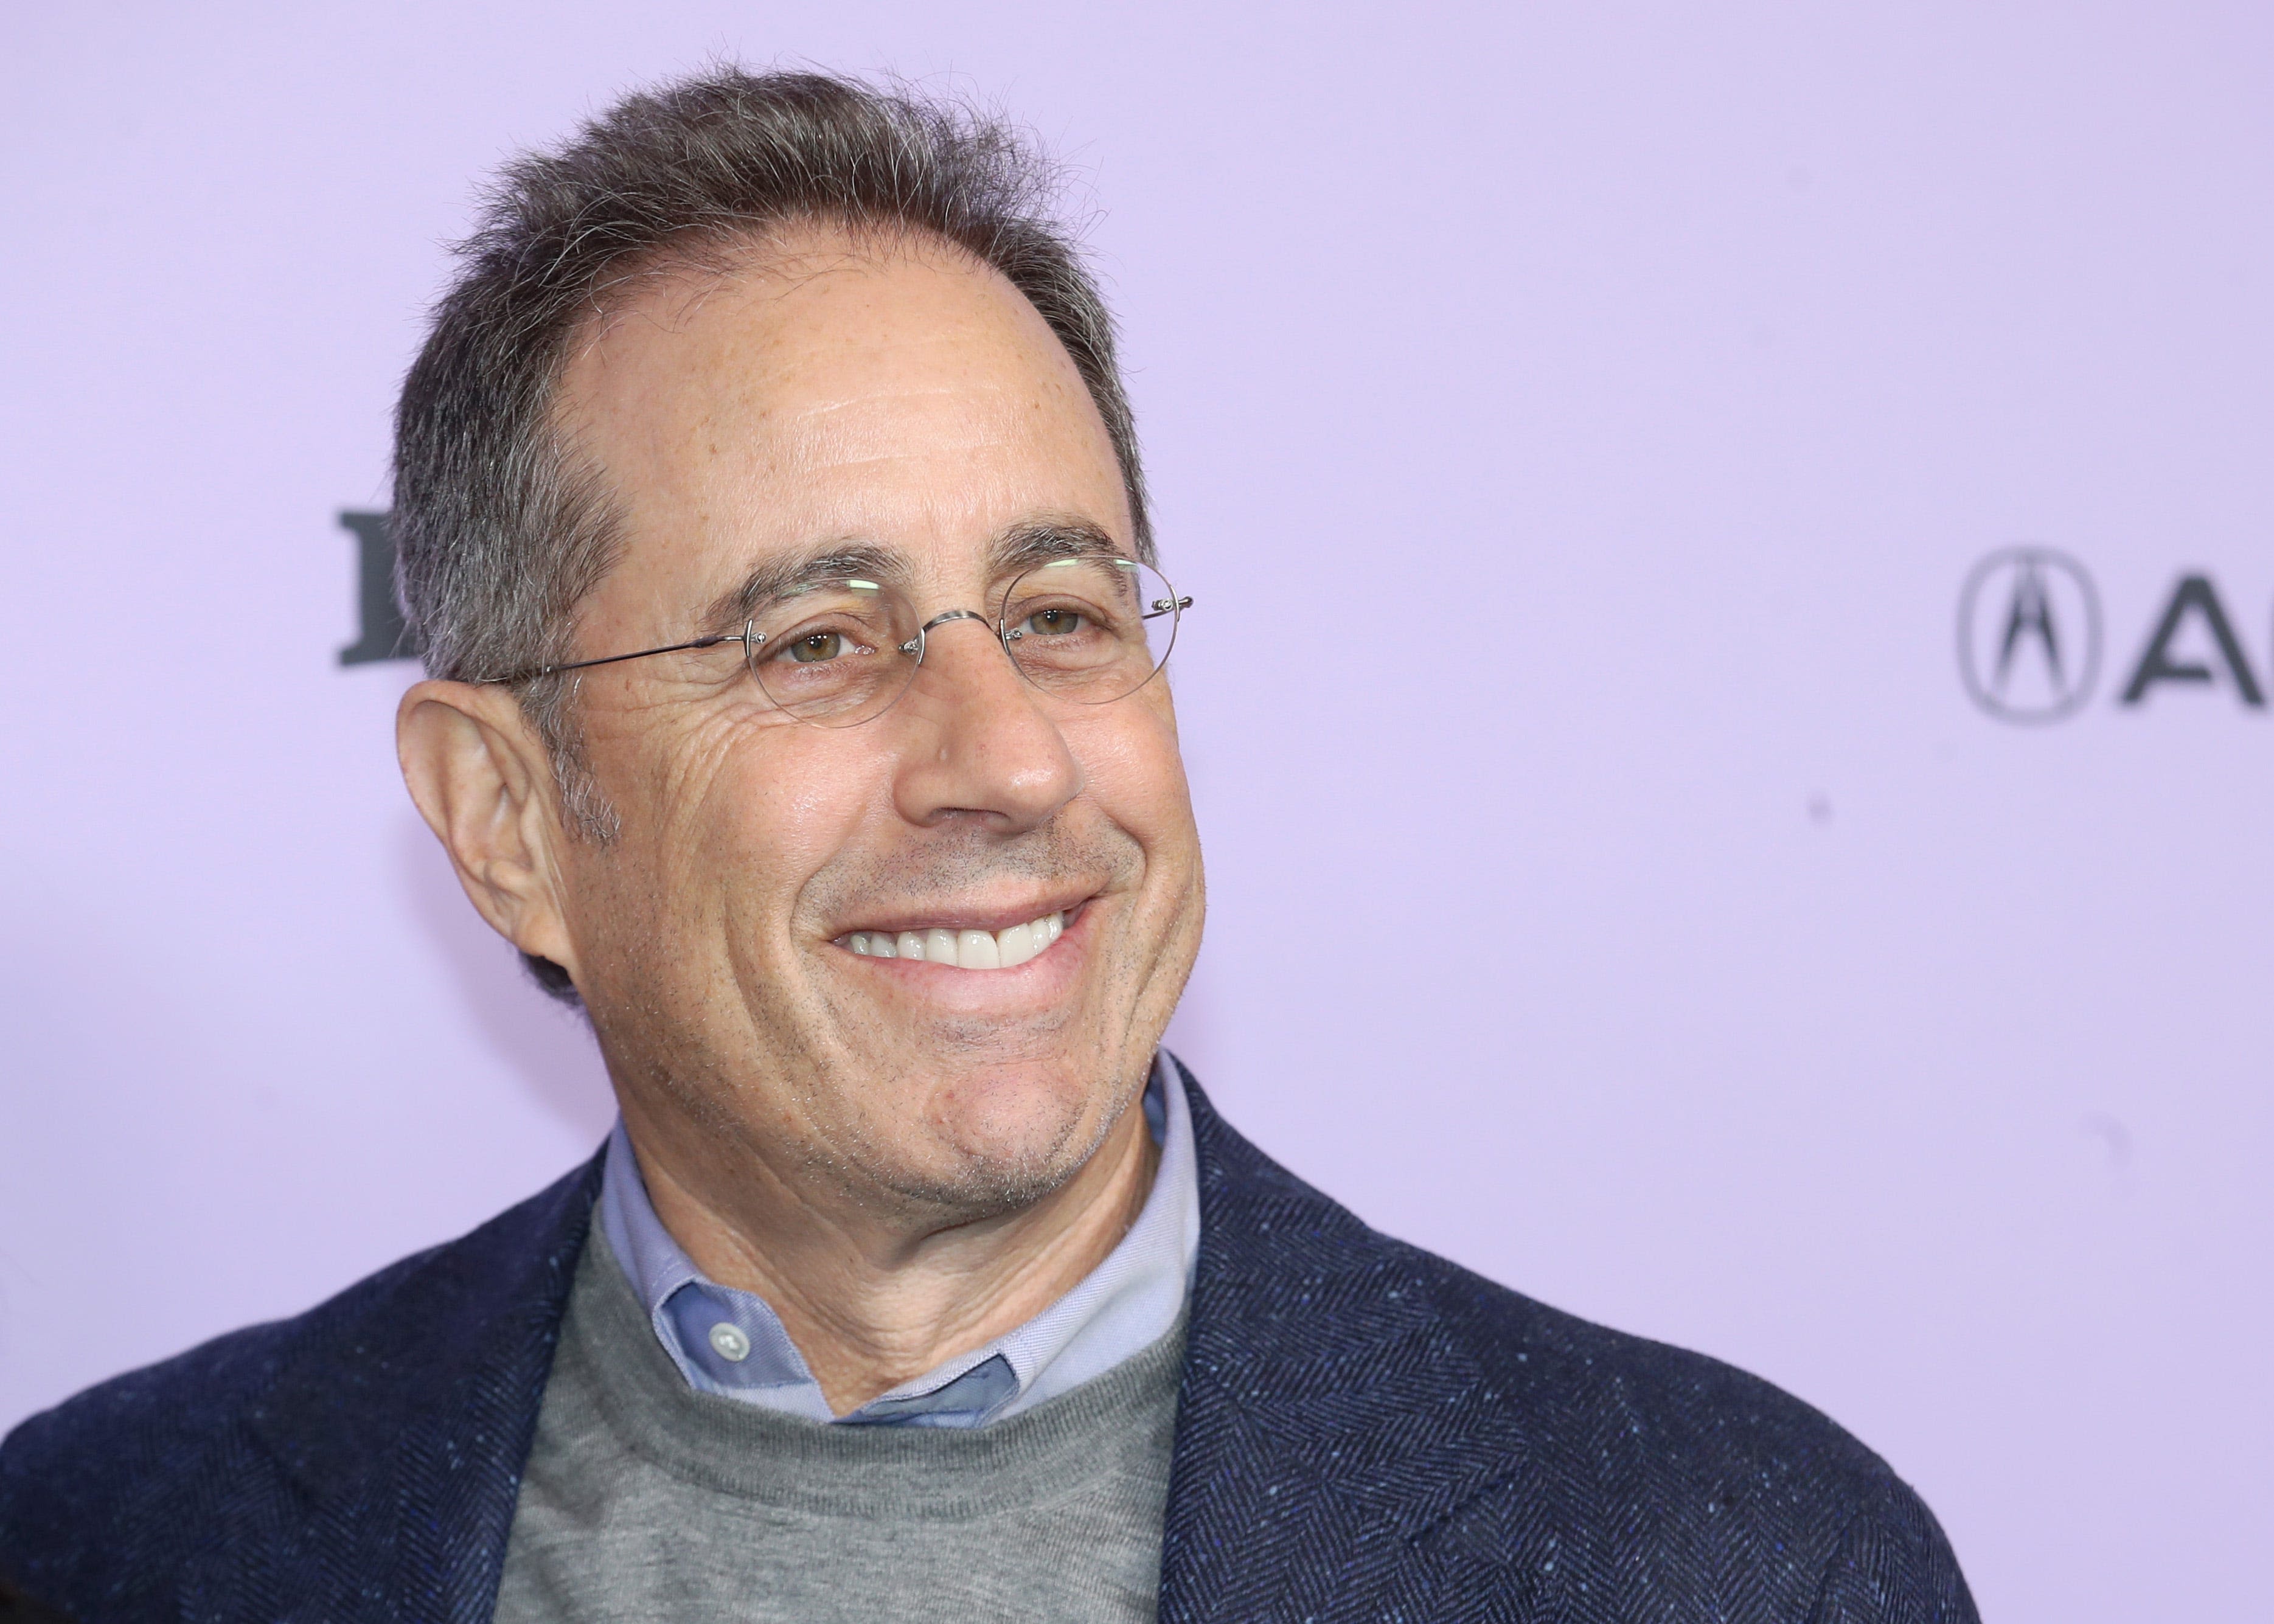 Jerry Seinfeld's comedy show interrupted by pro-Palestinian protesters after Duke walkouts